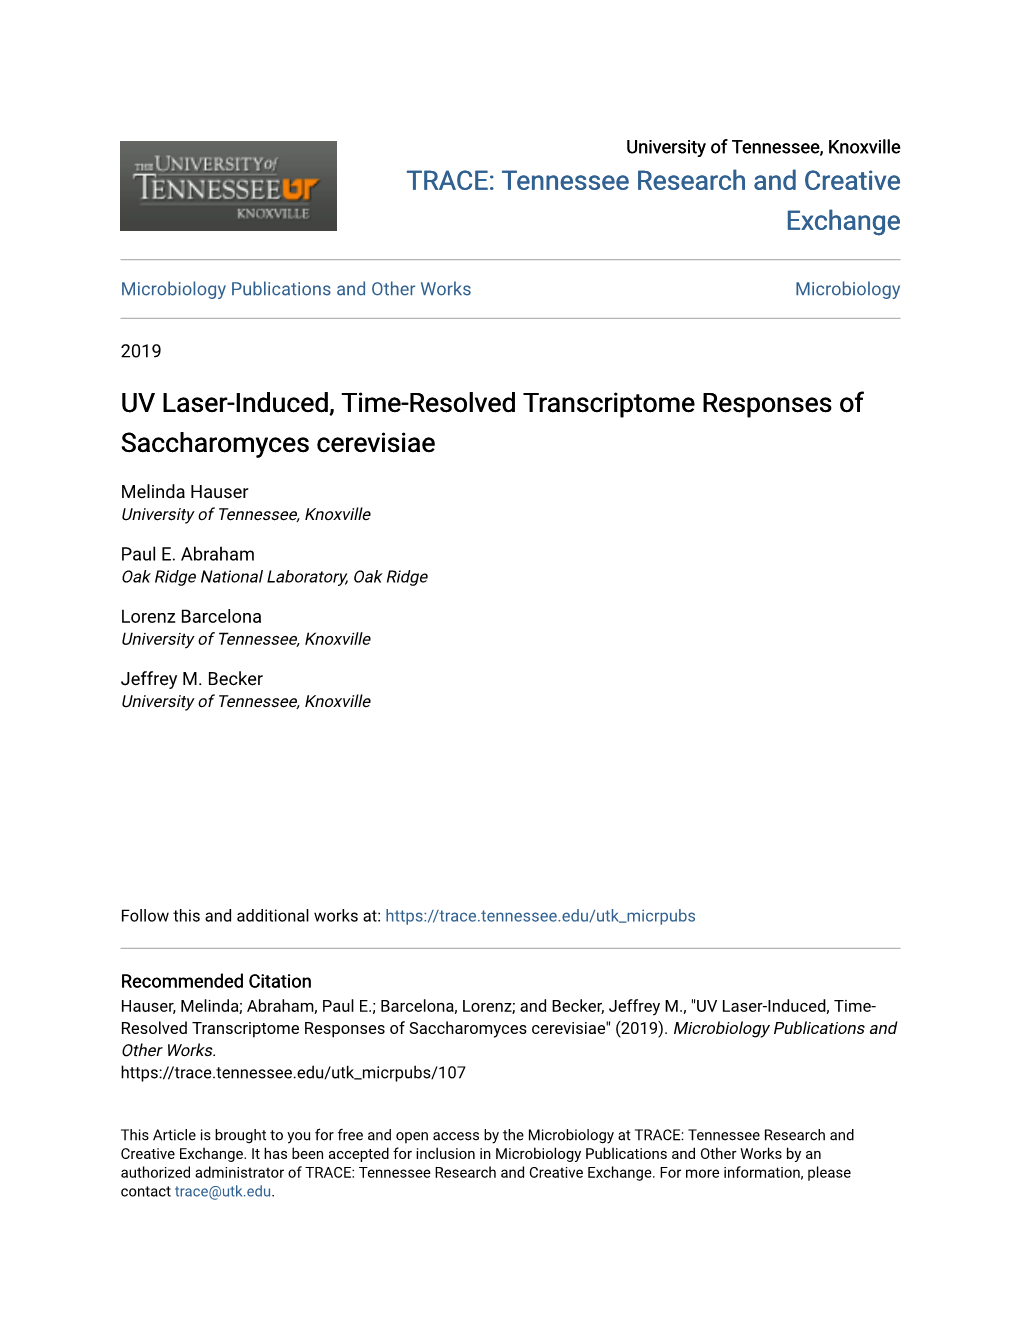 UV Laser-Induced, Time-Resolved Transcriptome Responses of Saccharomyces Cerevisiae